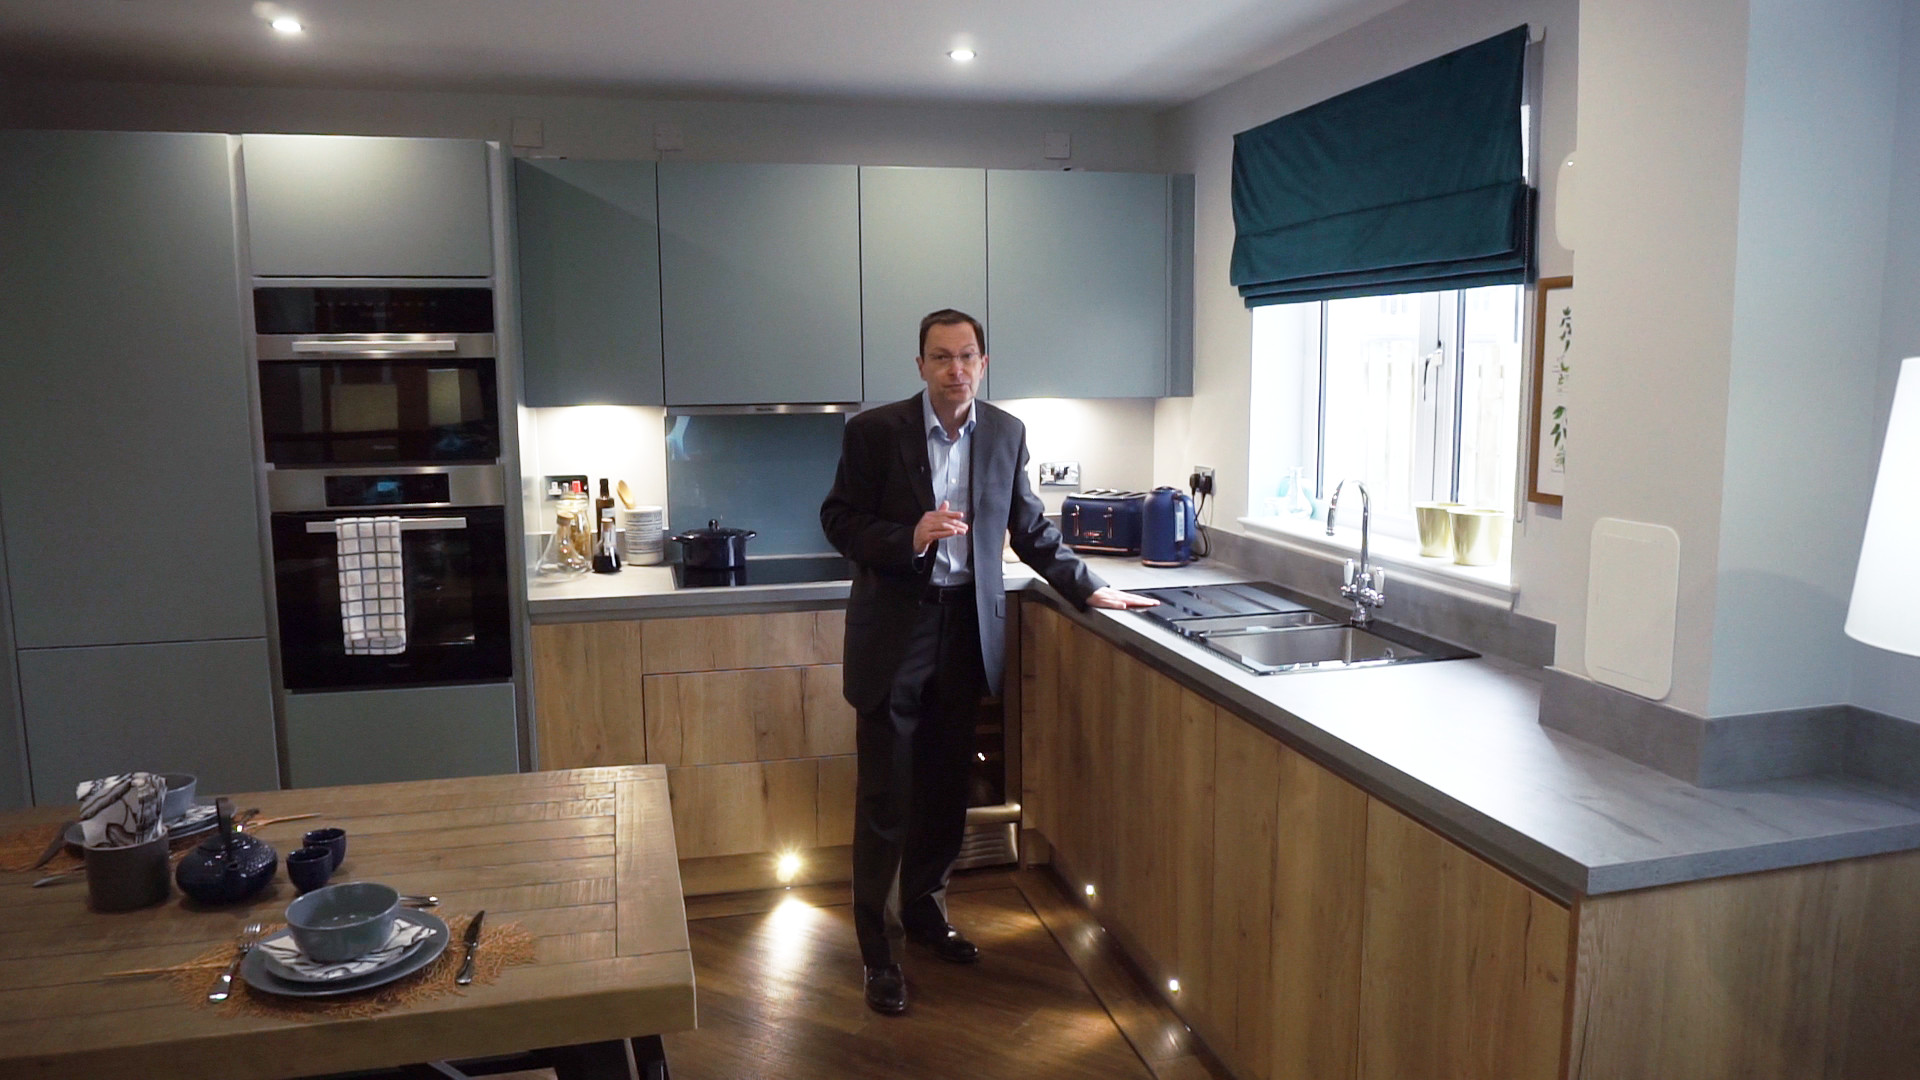 Allanwater Homes accountant turns presenter to showcase new developments